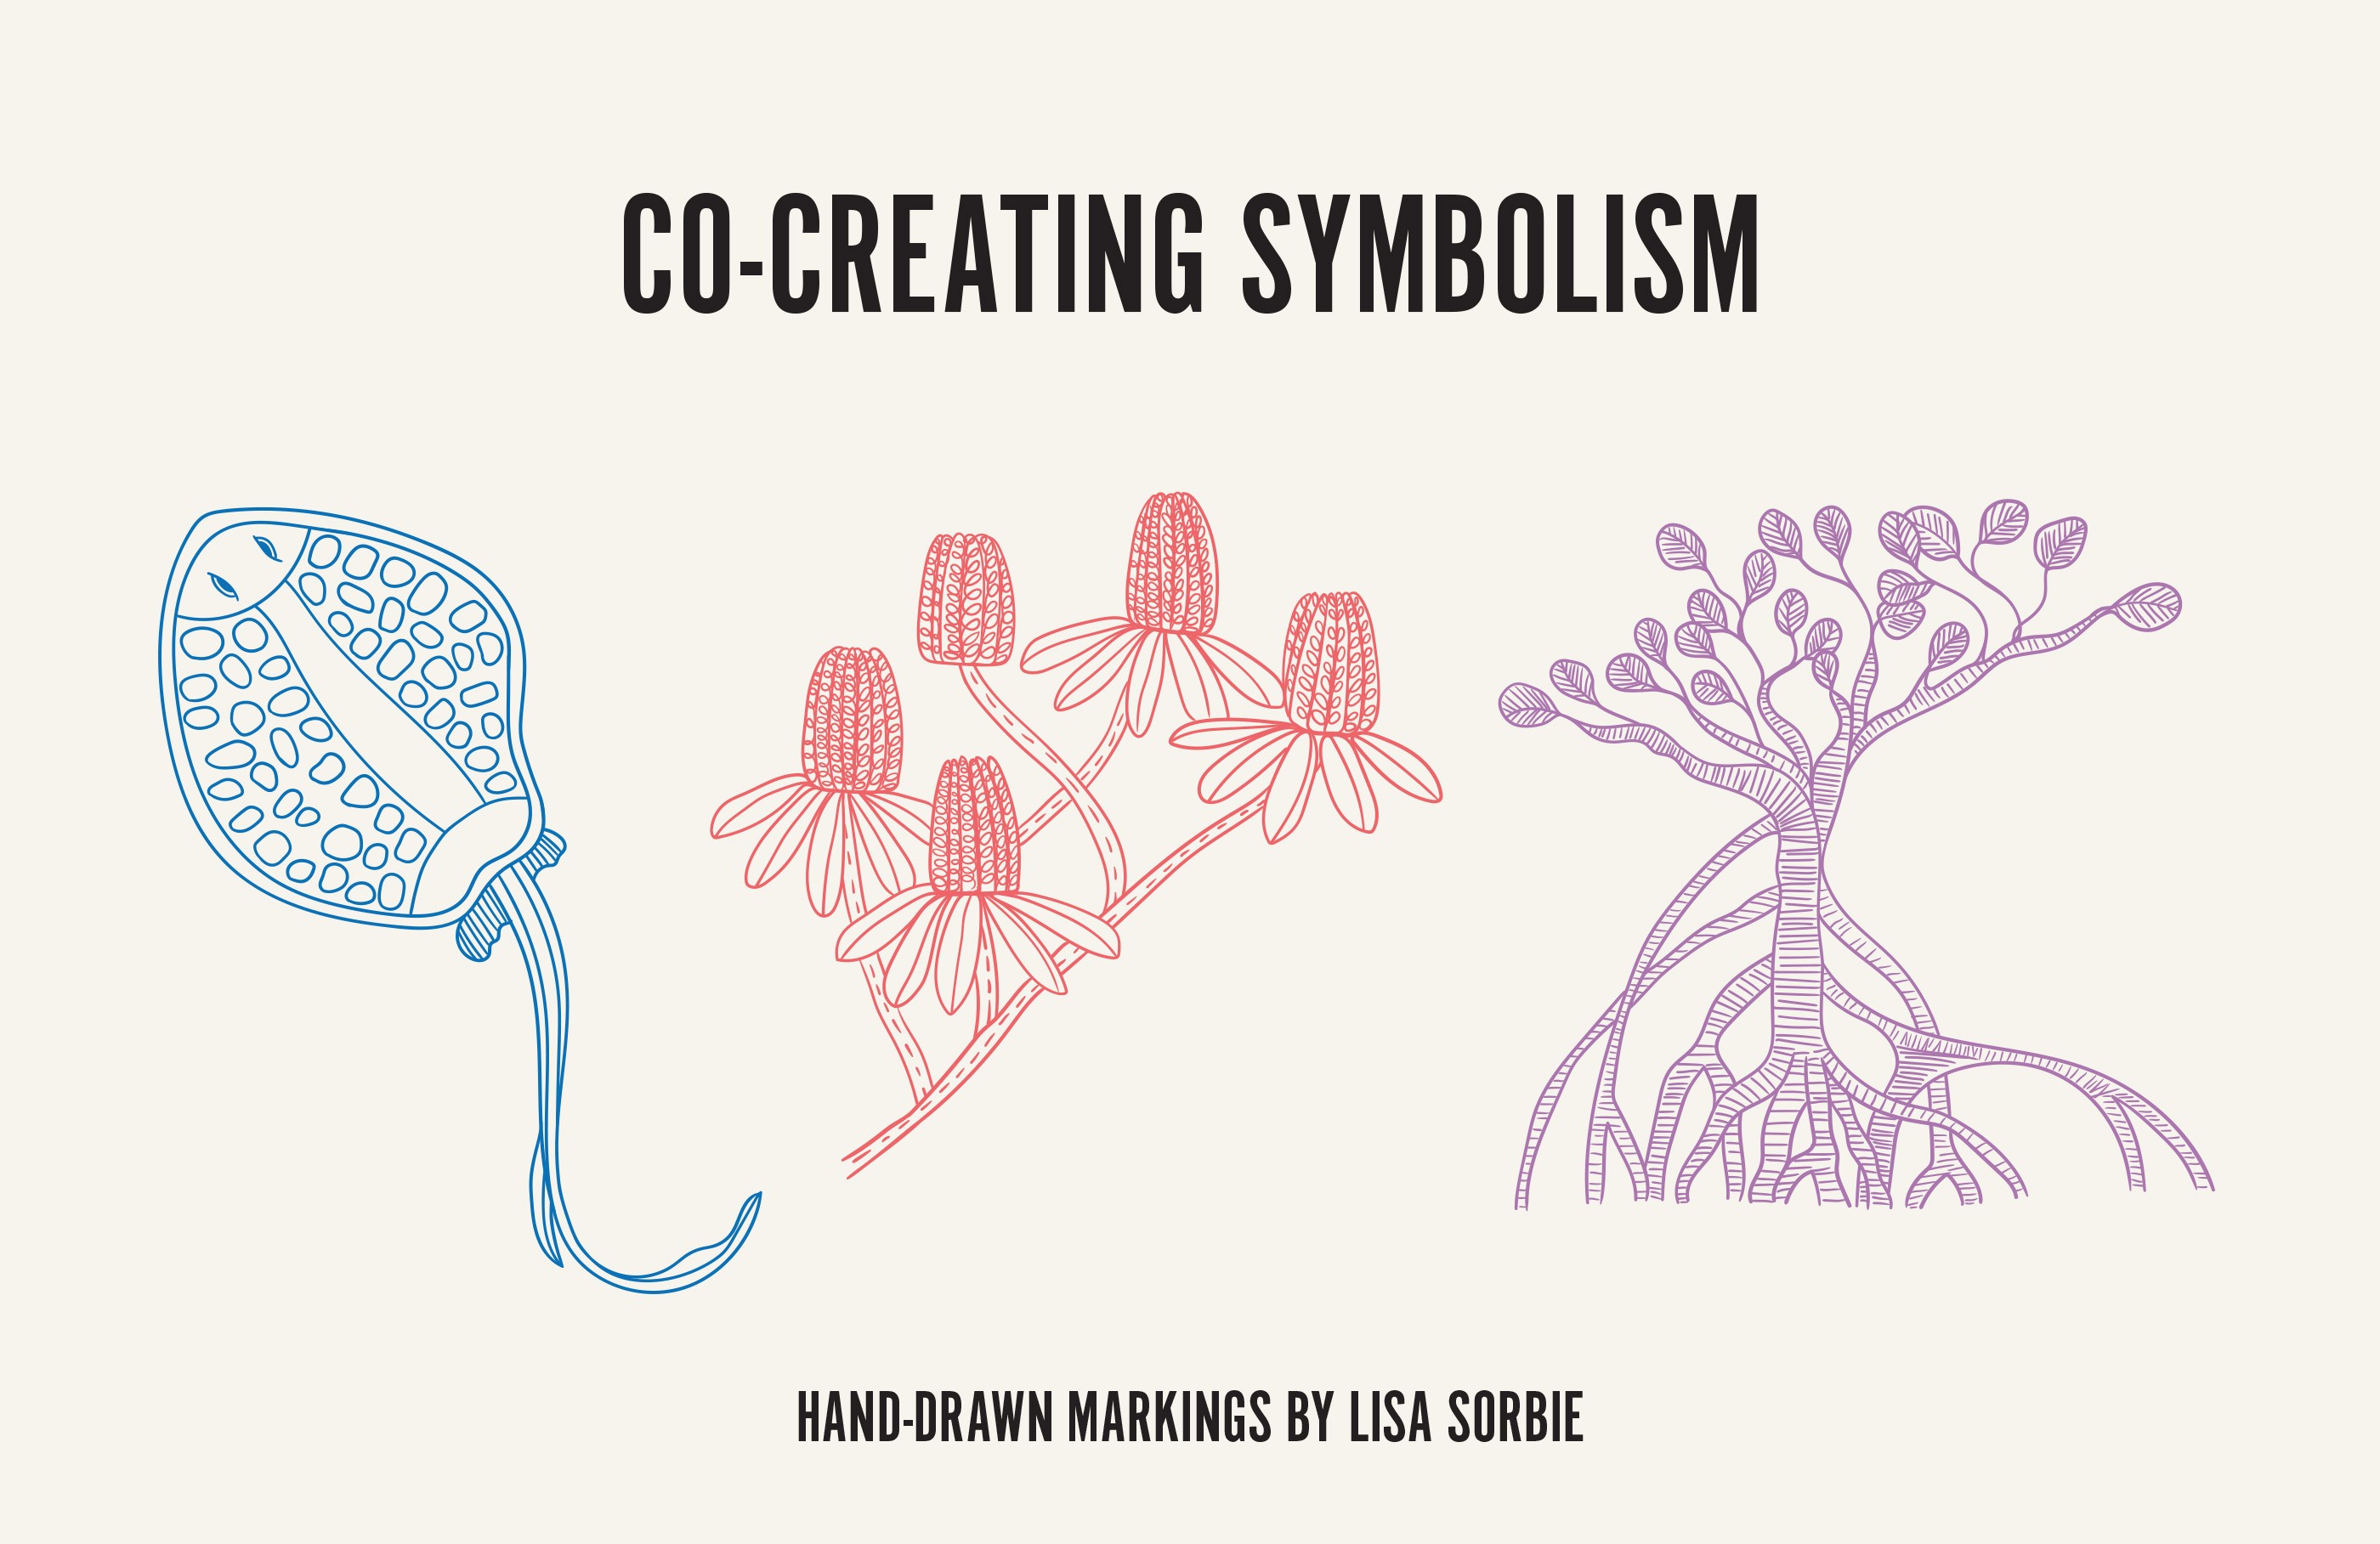 Hand-drawn markings of a sting ray, banksia and mangrove by Lisa Sorbie